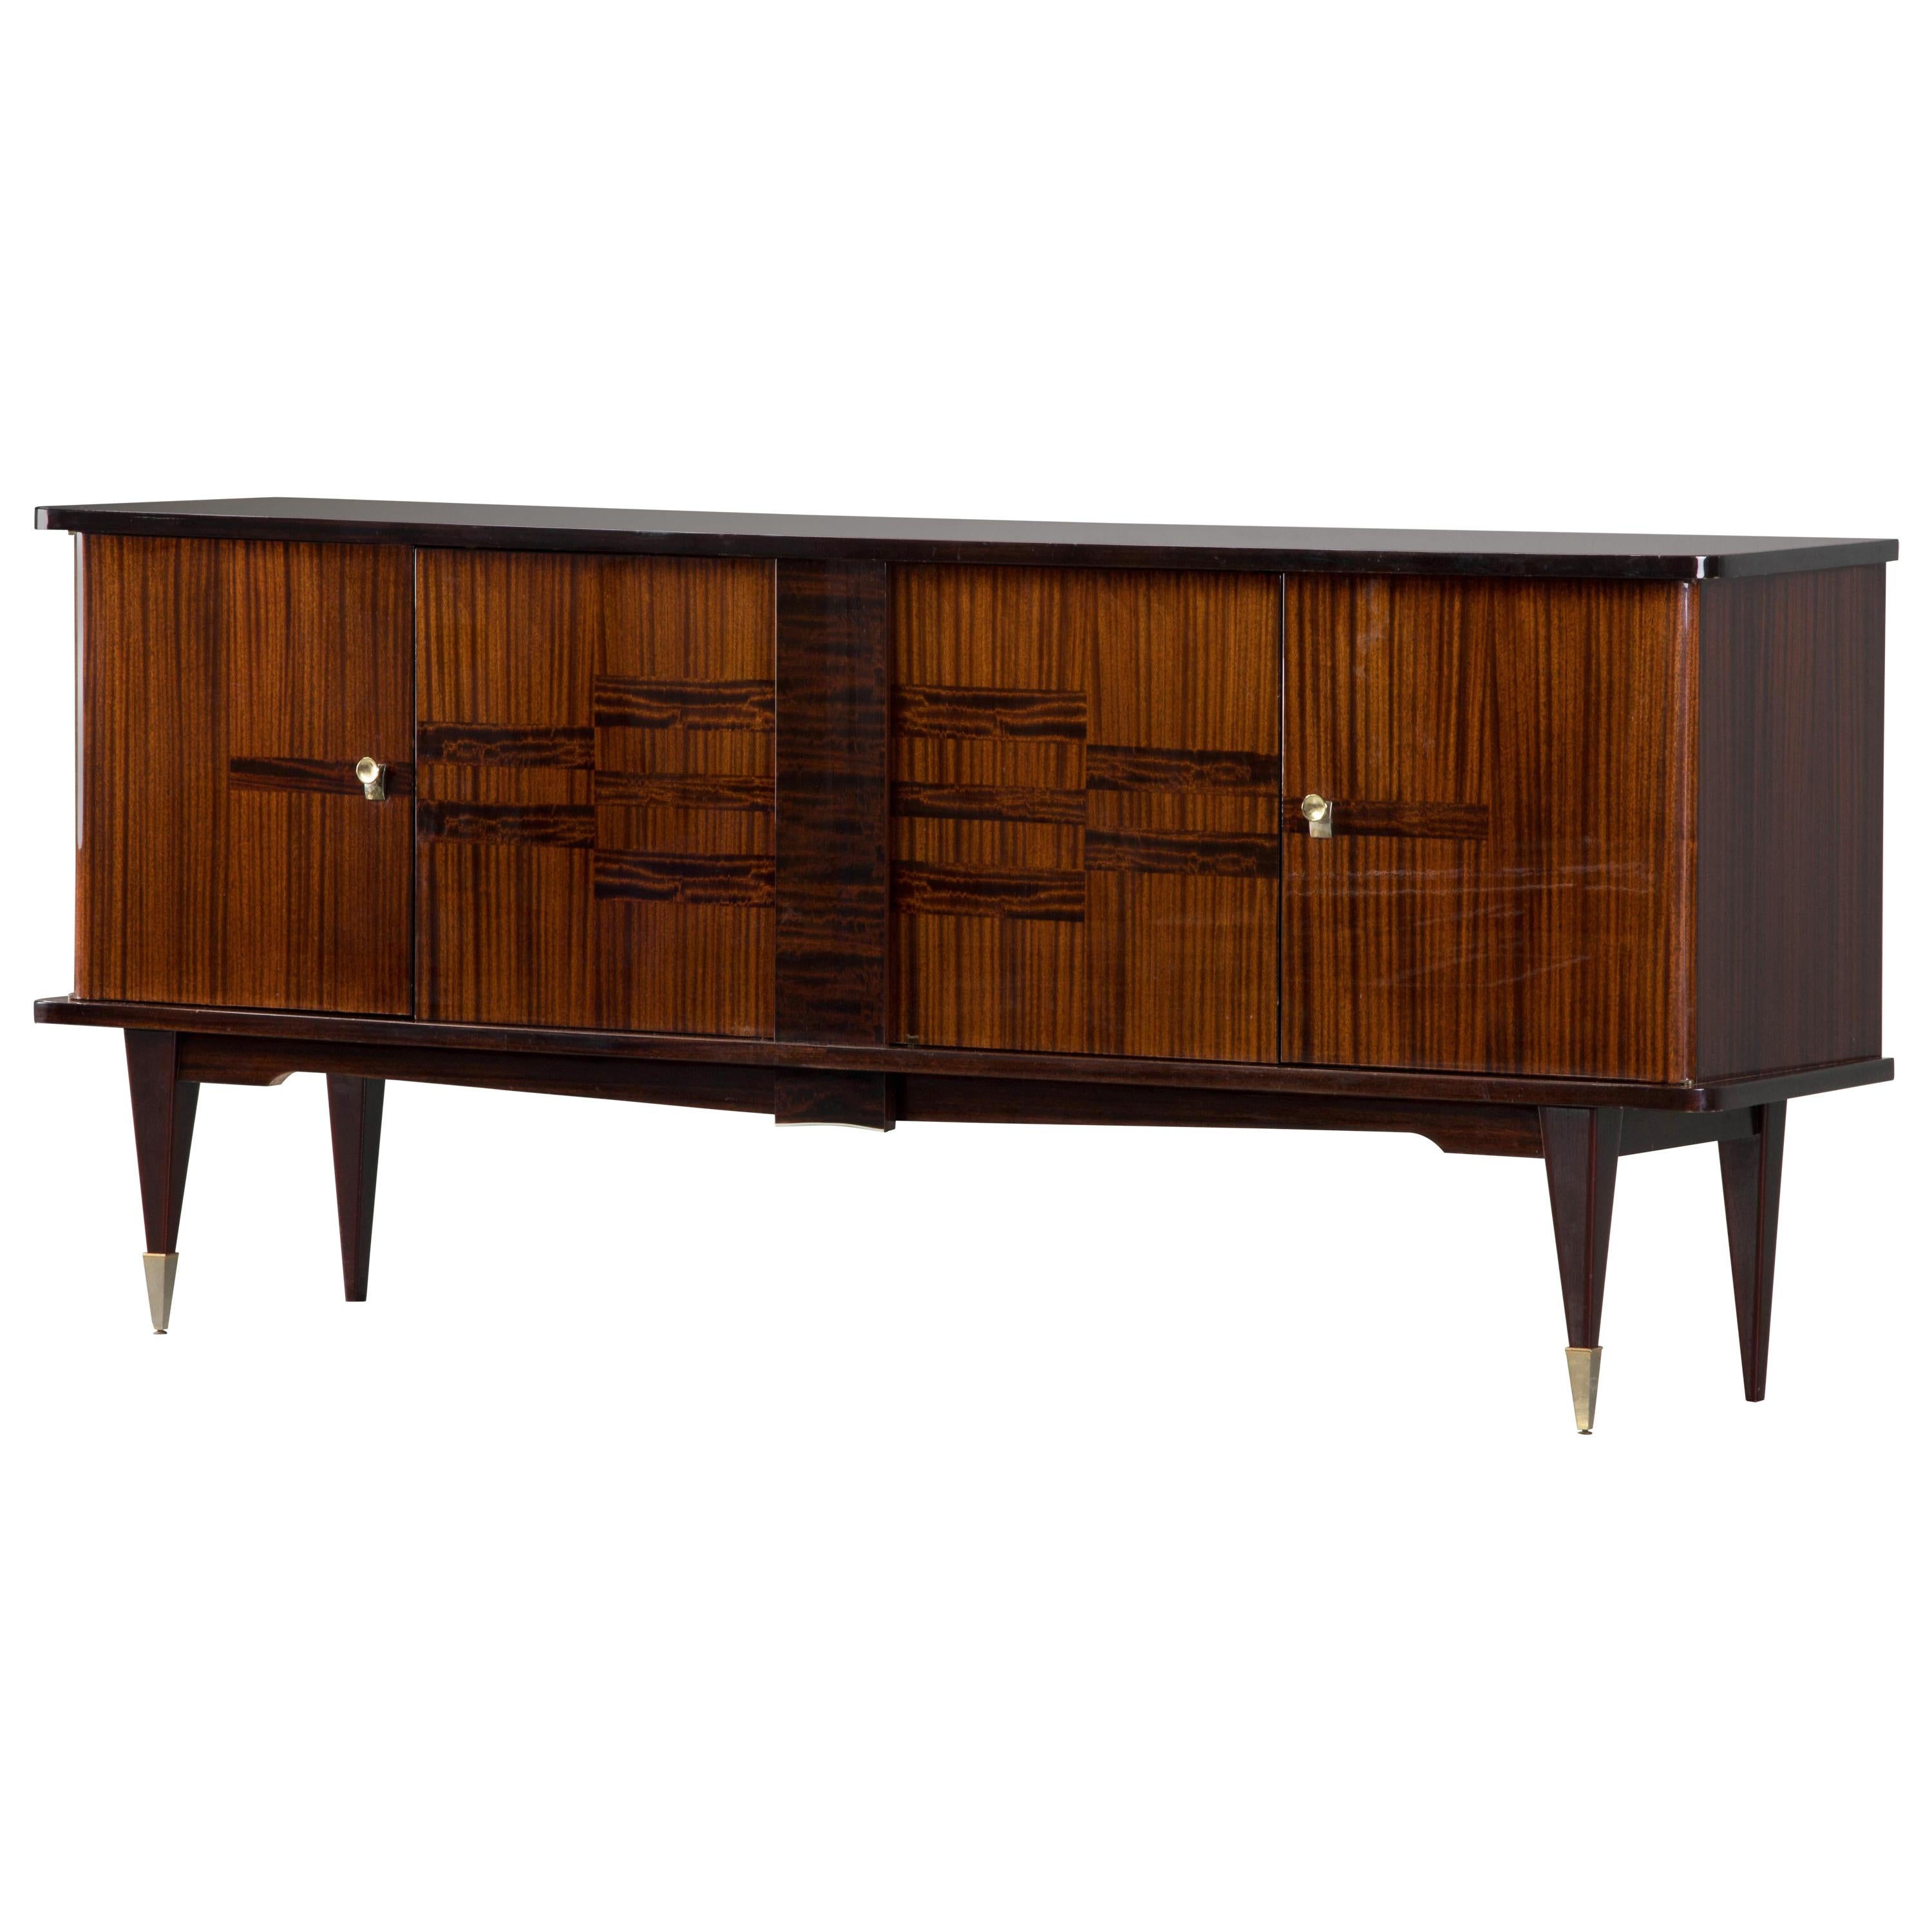 French Art Deco sideboard, credenza, with bar cabinet. The sideboard features stunning Macassar ebony wood grain with a decorative pattern design. It offers ample storage, with shelve behind two doors on the left and three drawers under and